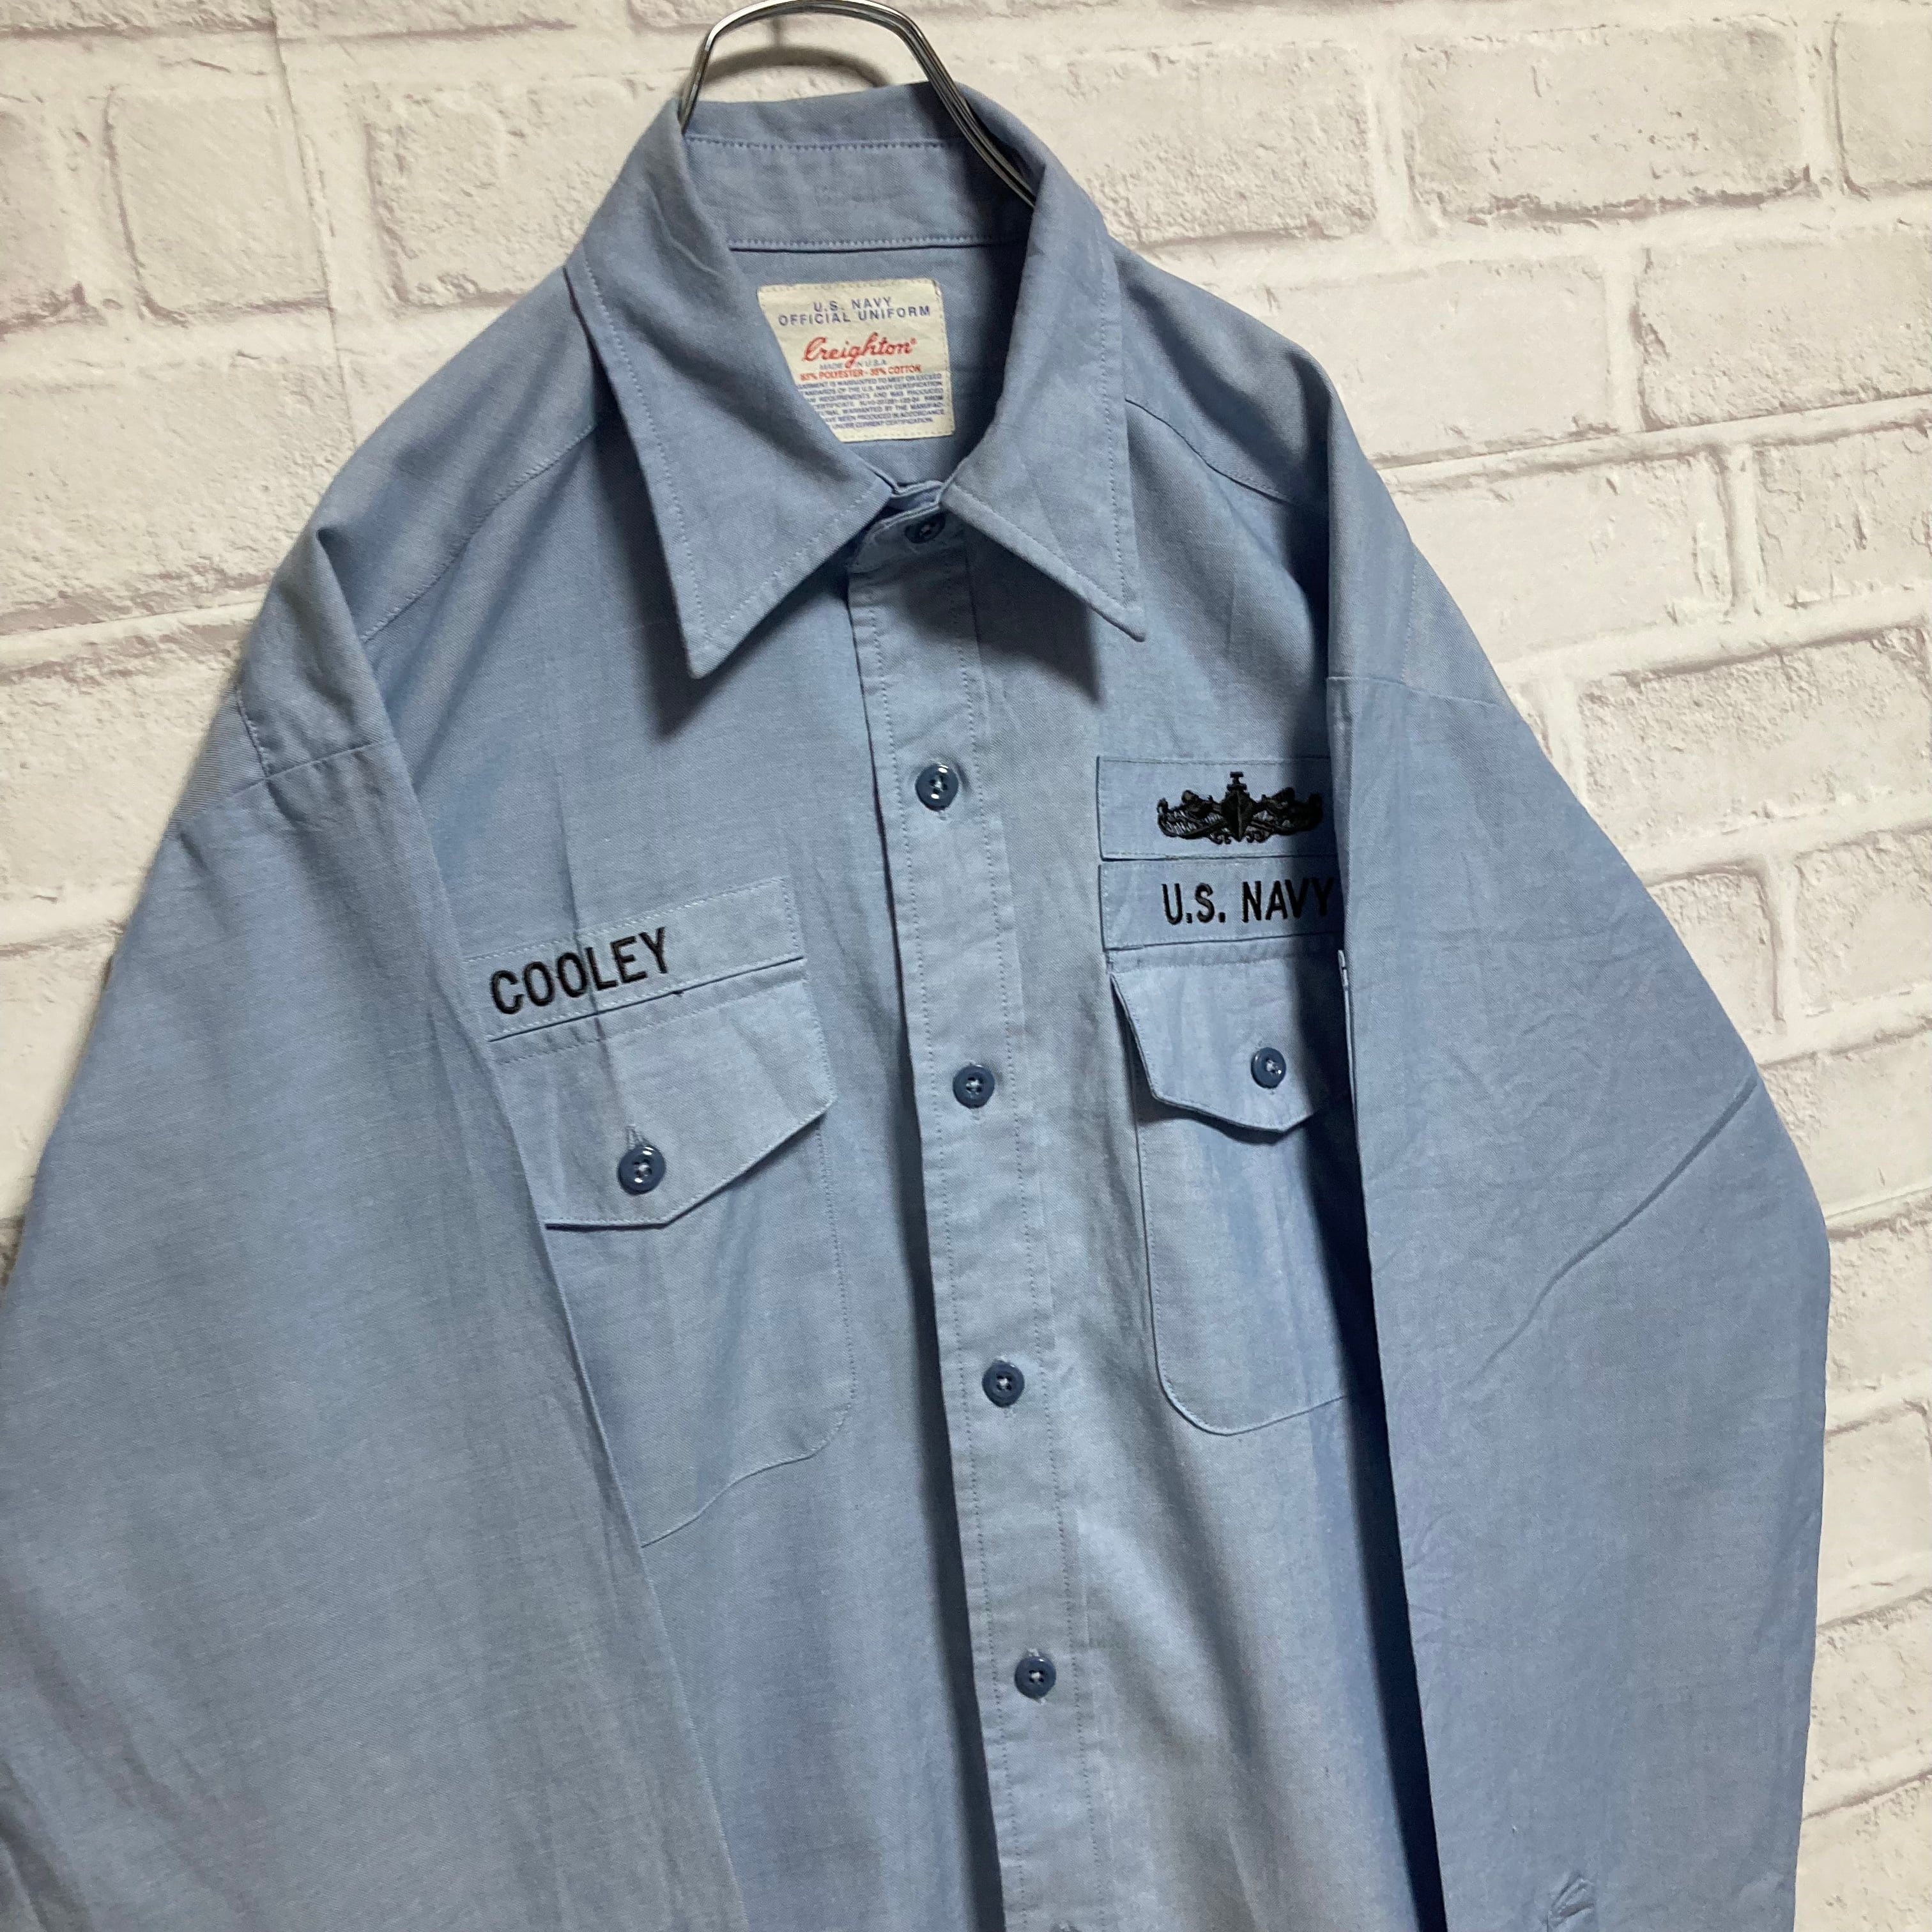 U.S.NAVY】L/S Military Shirt XL相当 Made in USA アメリカ軍 海軍